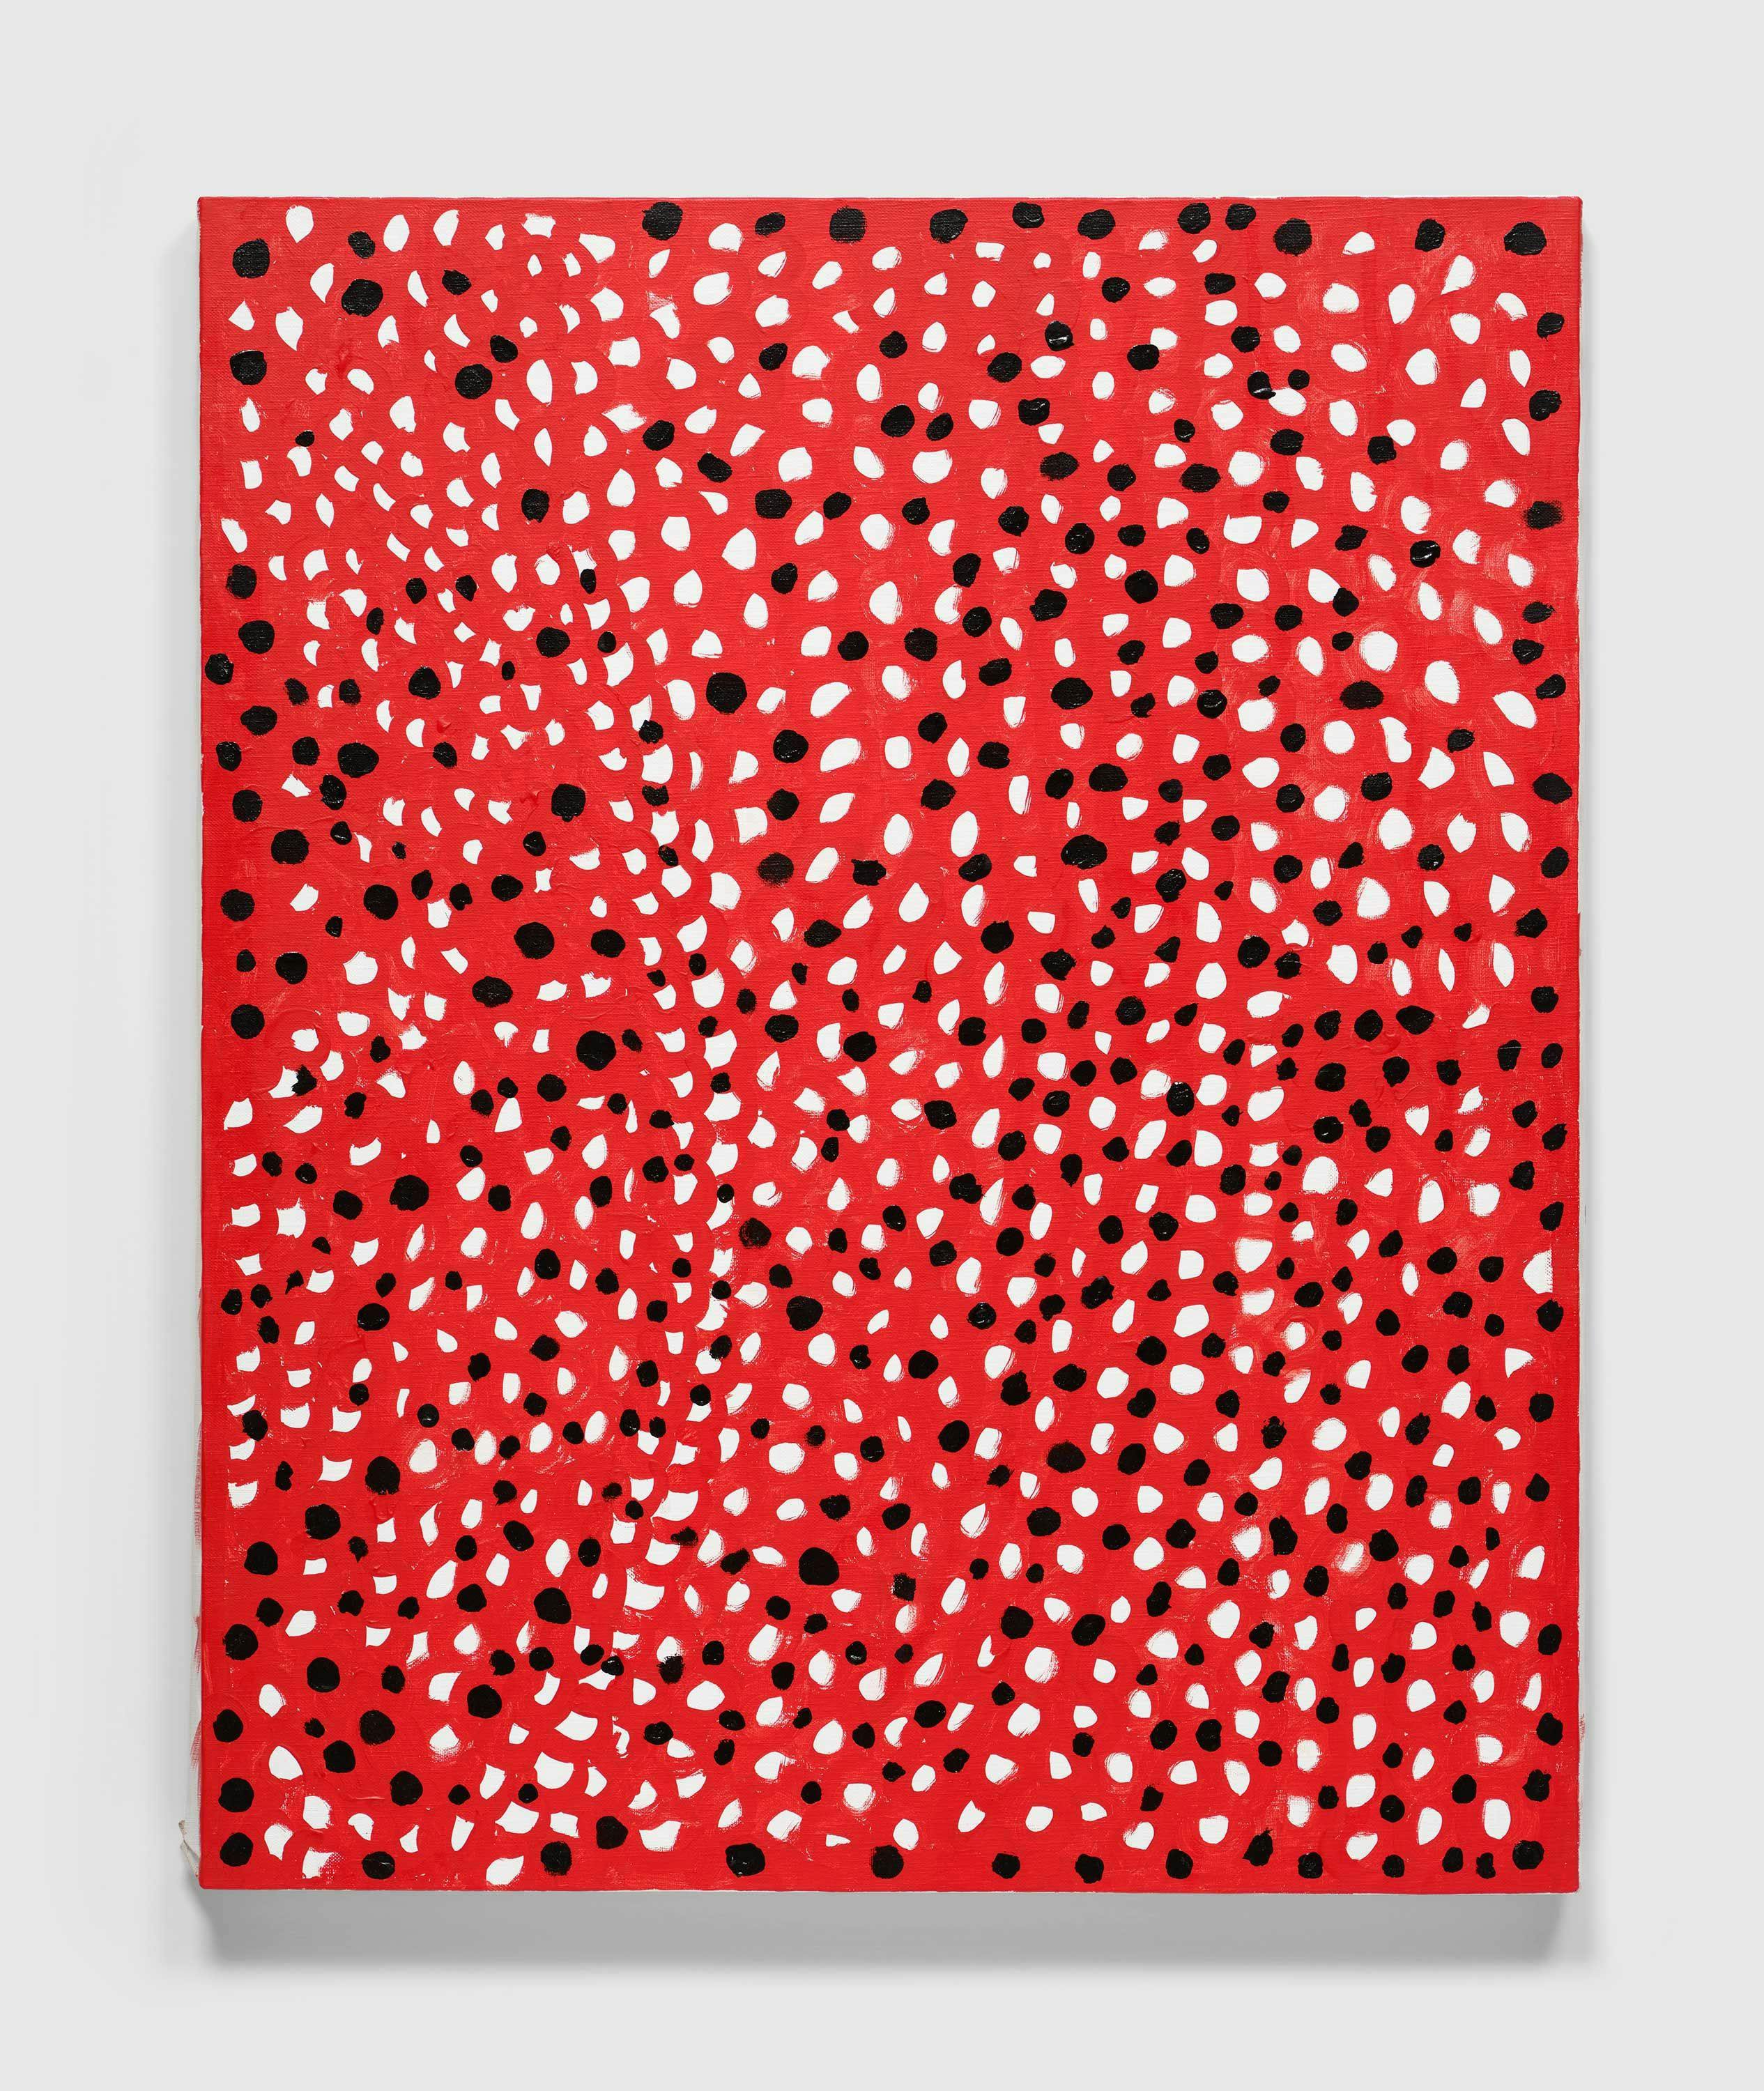 A painting by Yayoi Kusama, titled EVERY DAY I PRAY FOR LOVE, dated 2022.